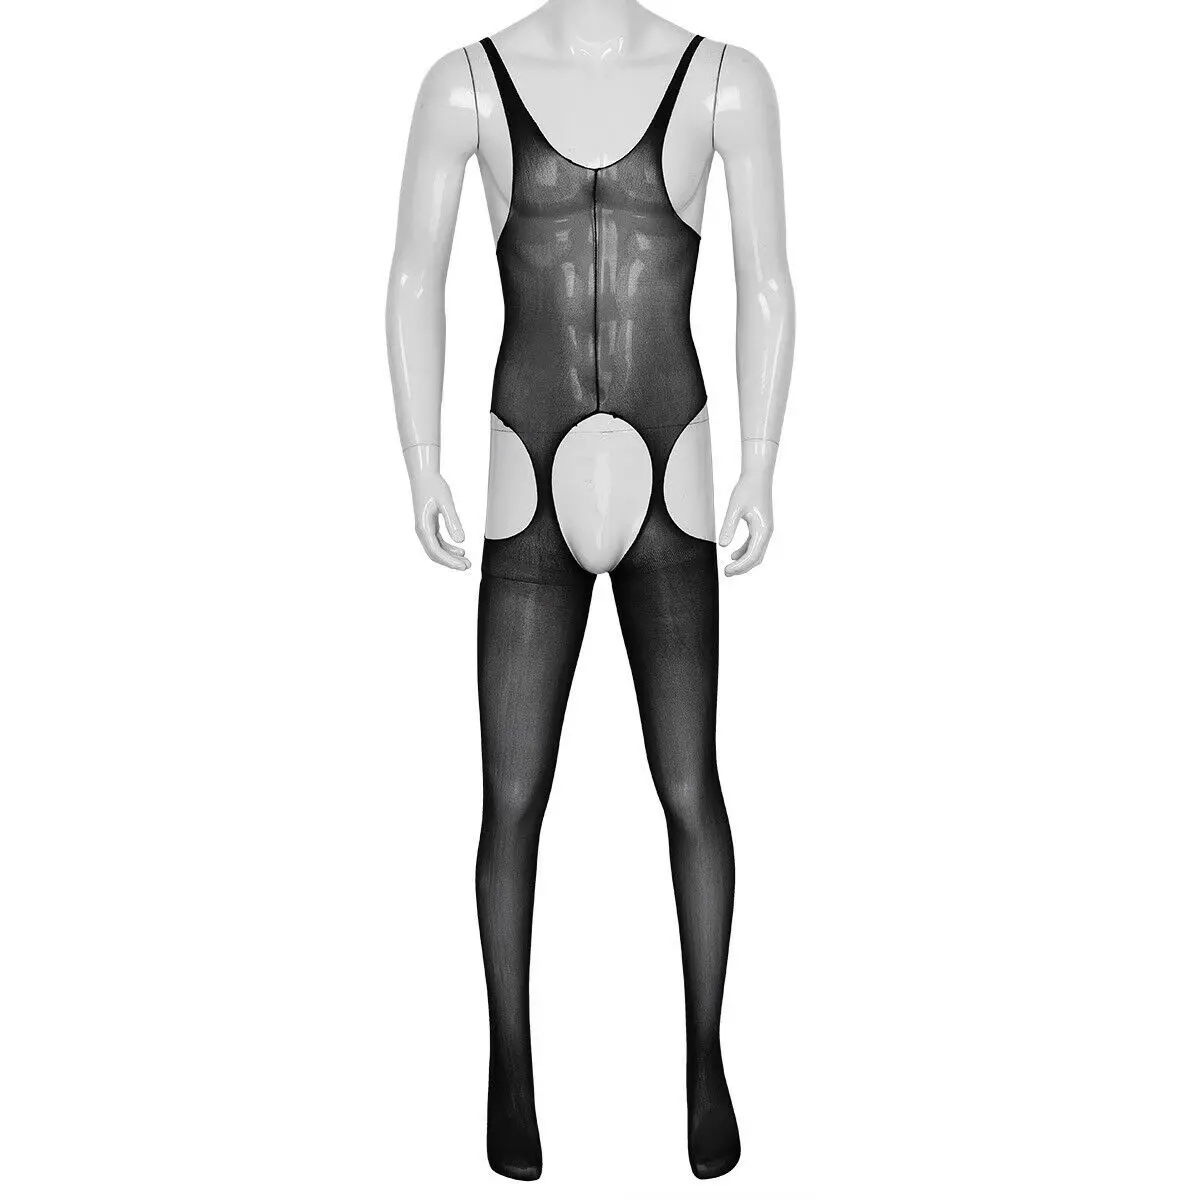 

Men Sissy Erotic Lingerie See-through Crotchless Full Body Pantyhose Open Crotch Body Stocking Gay Sexy Underwear Male Tights